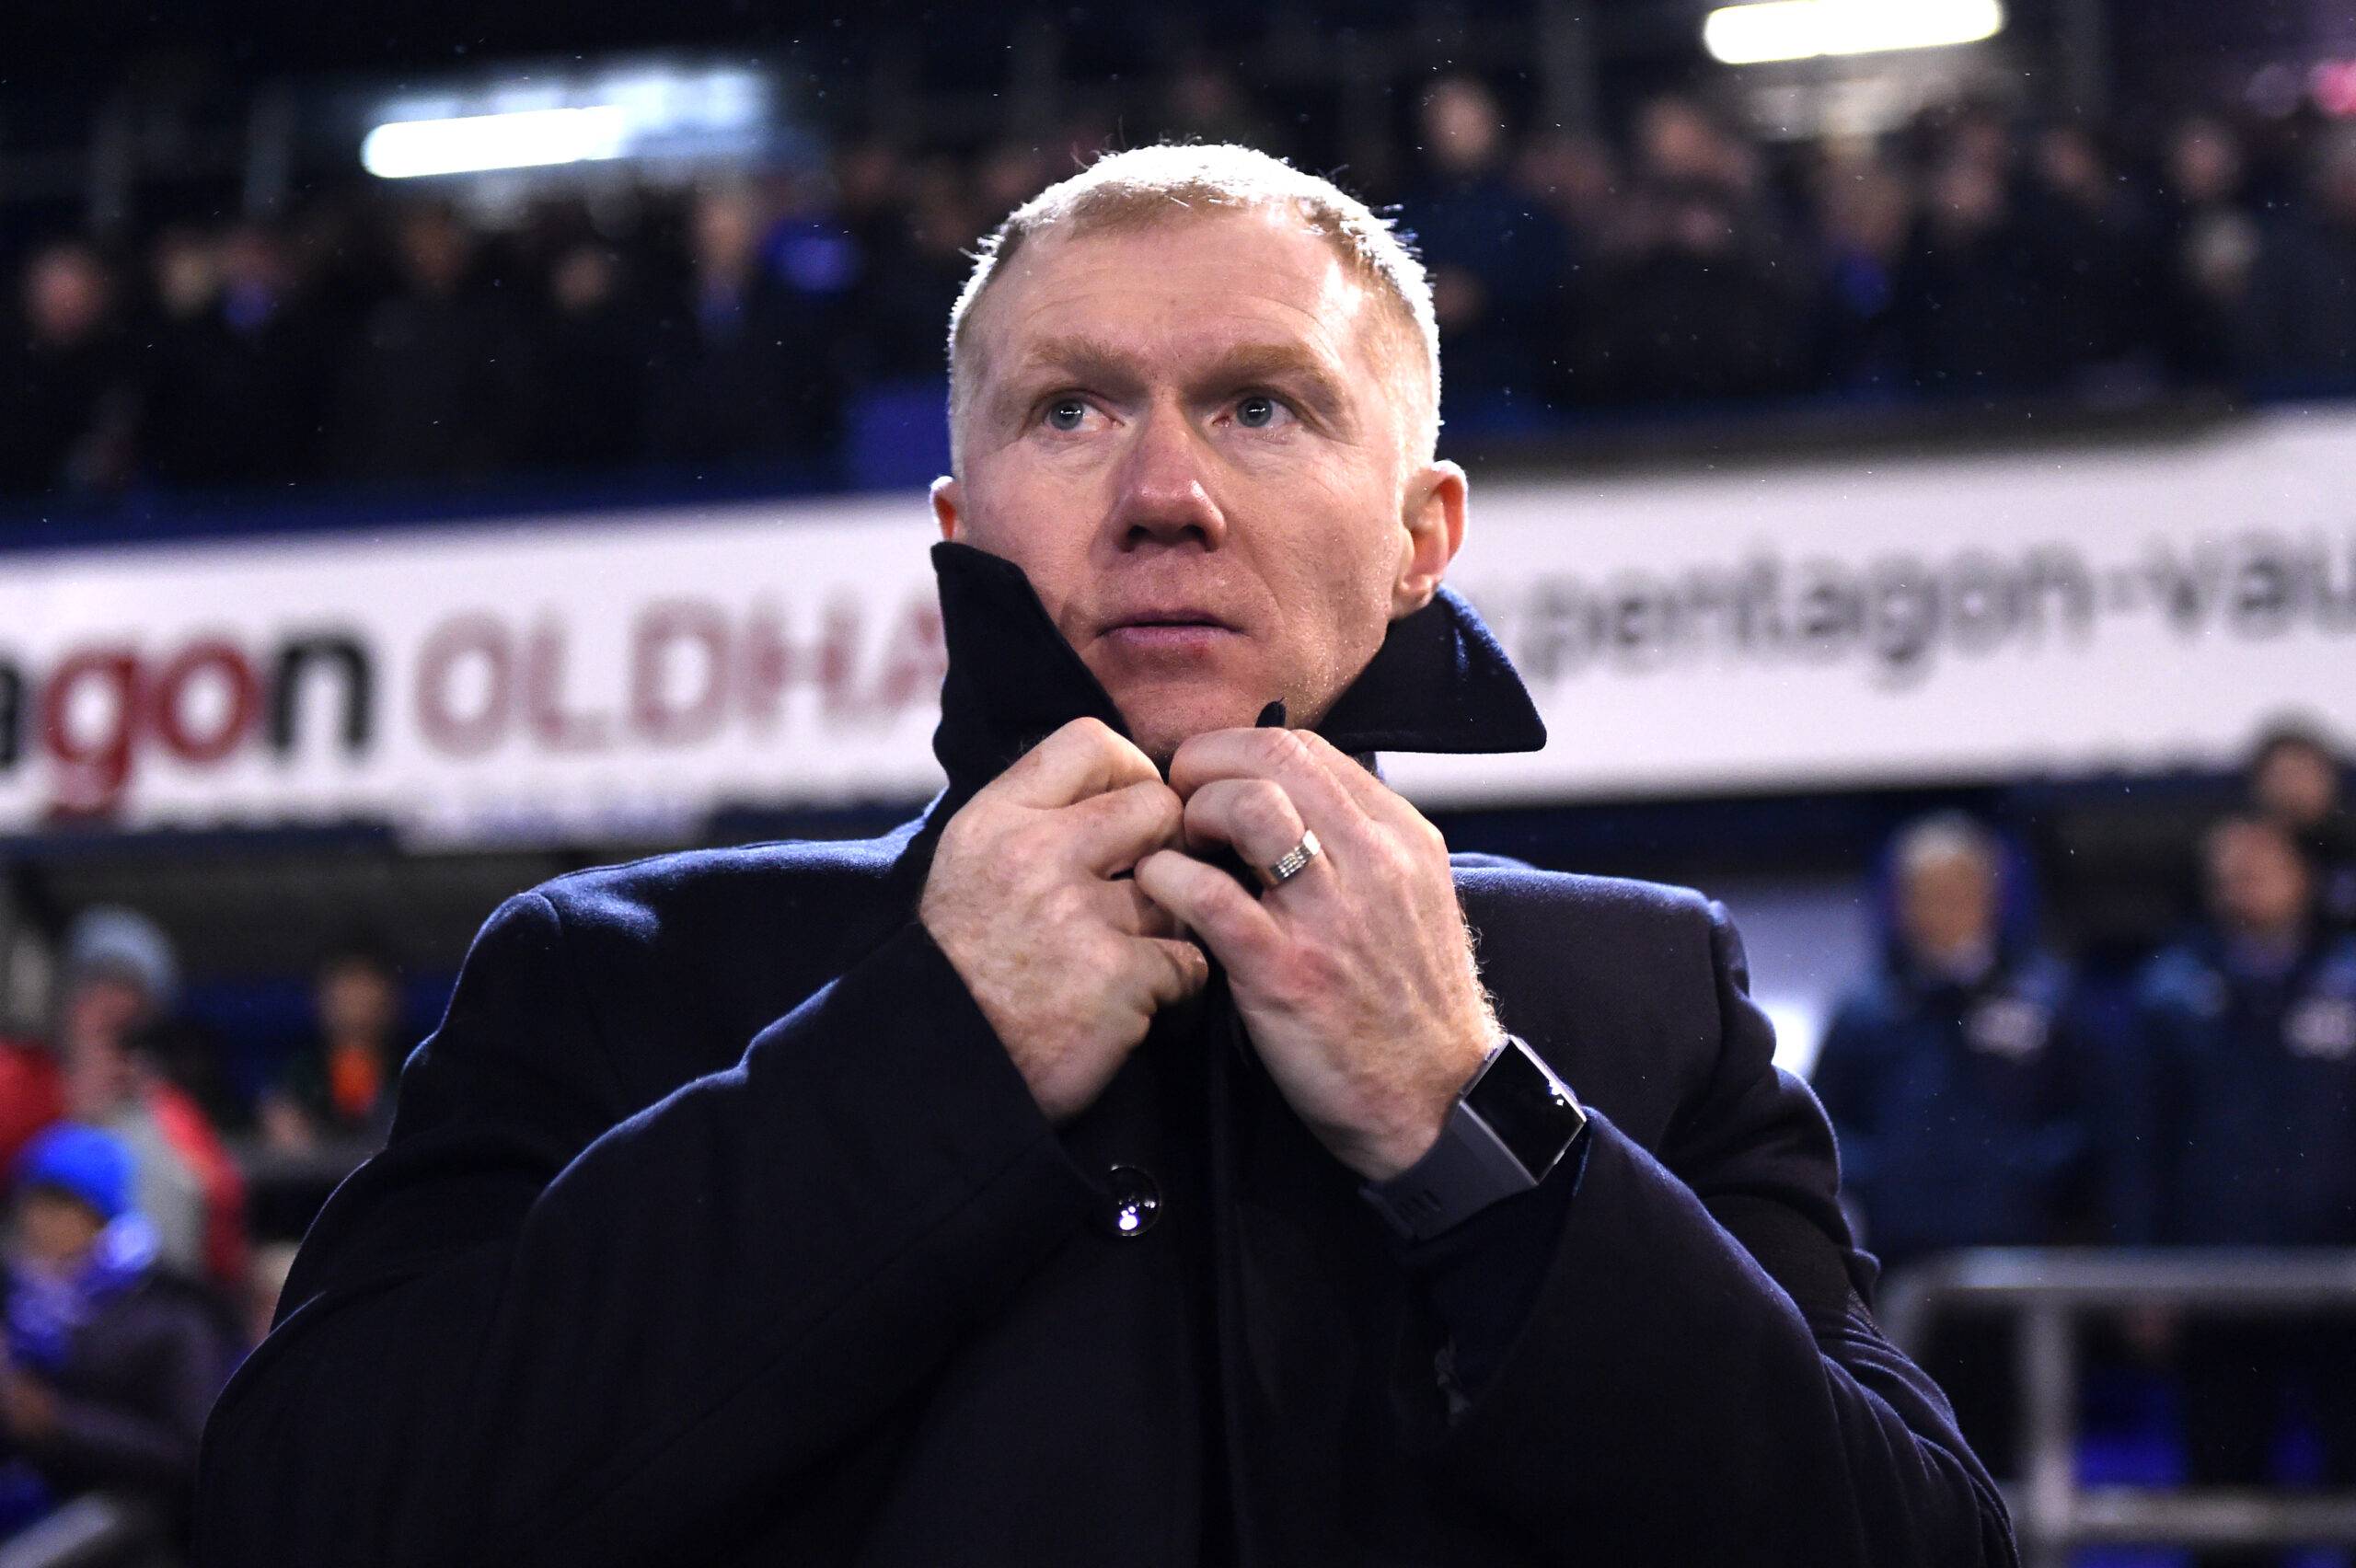 Paul Scholes watches on from the sidelines